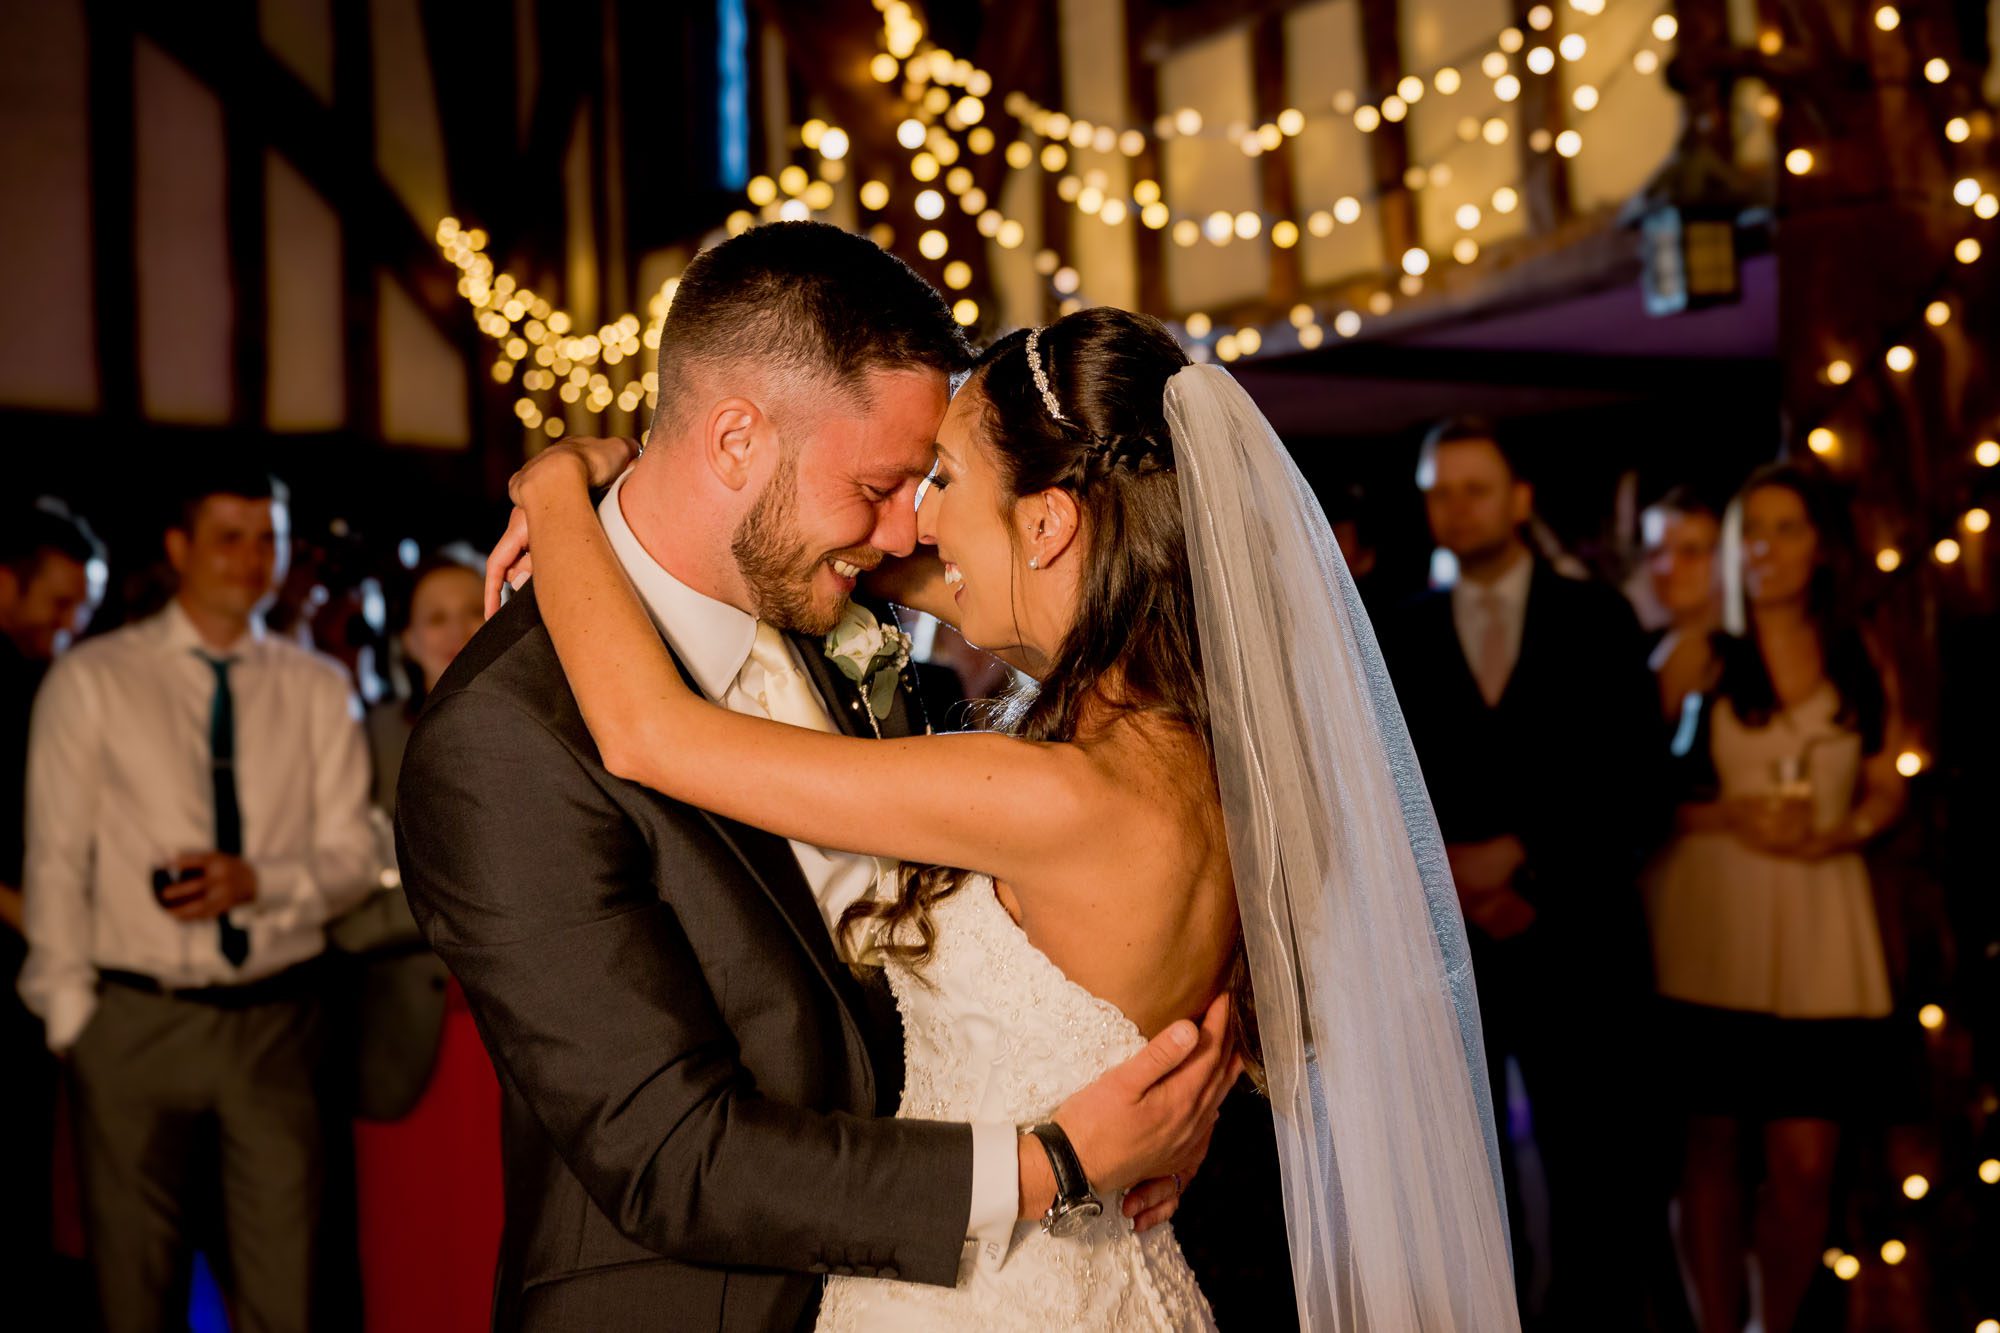 Bride and groom have their first dance together on their wedding day at Great Fosters.